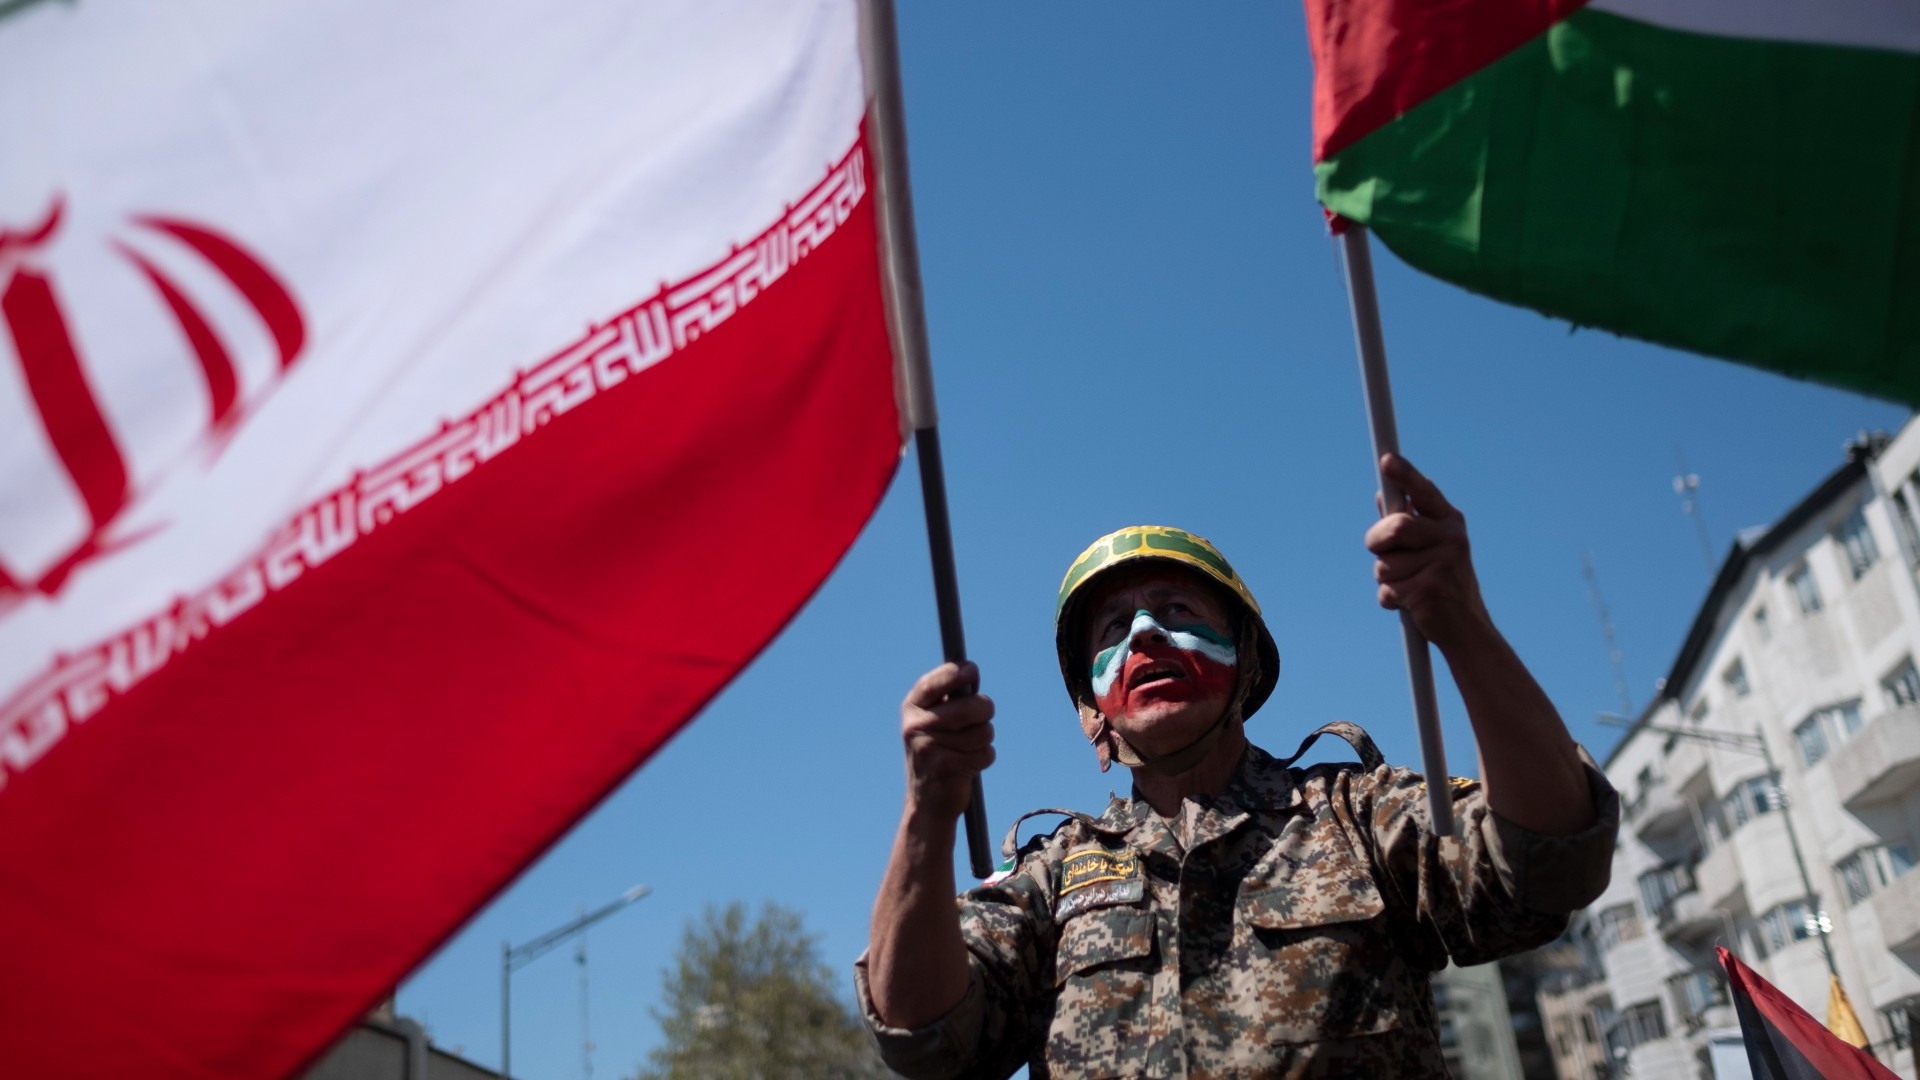 A protester wearing military uniform waves an Iranian and a Palestinian flag during a rally following the Damascus consulate strike, on 5 April (Reuters/Morteza Nikoubazl/NurPhoto)